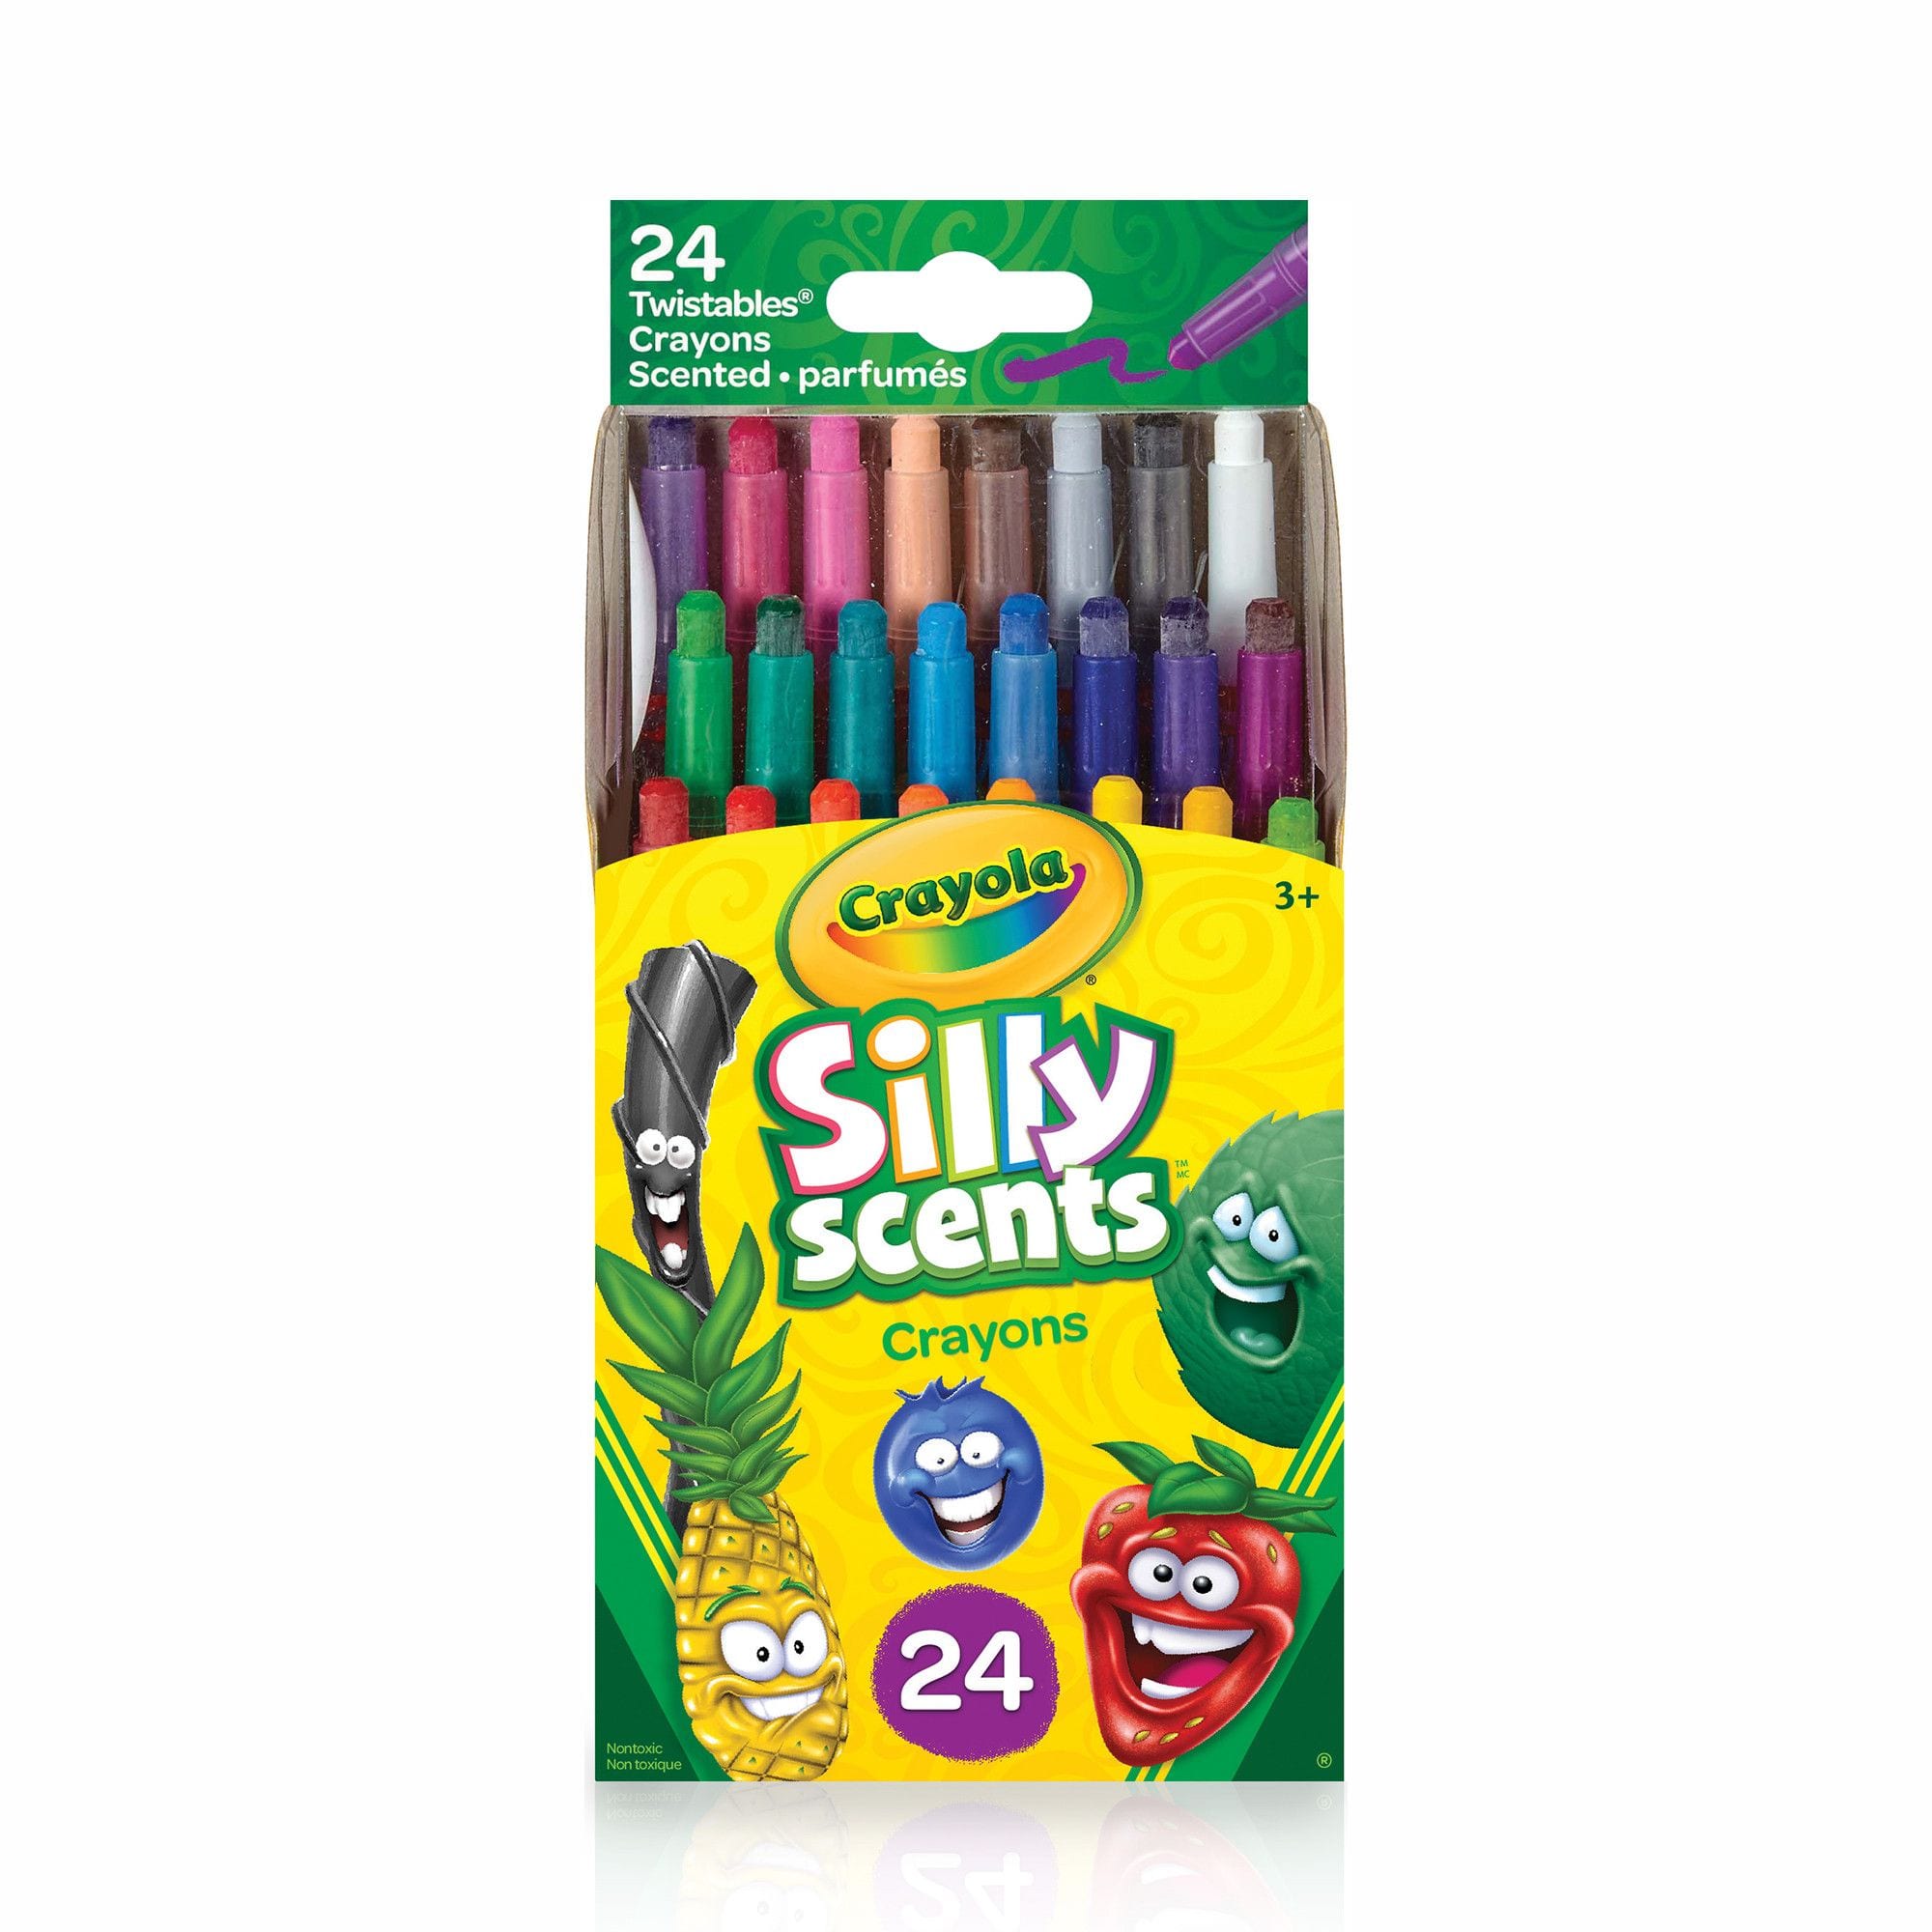 Crayola Silly Scents Mini Twistable Crayons, 24-pk | Party City